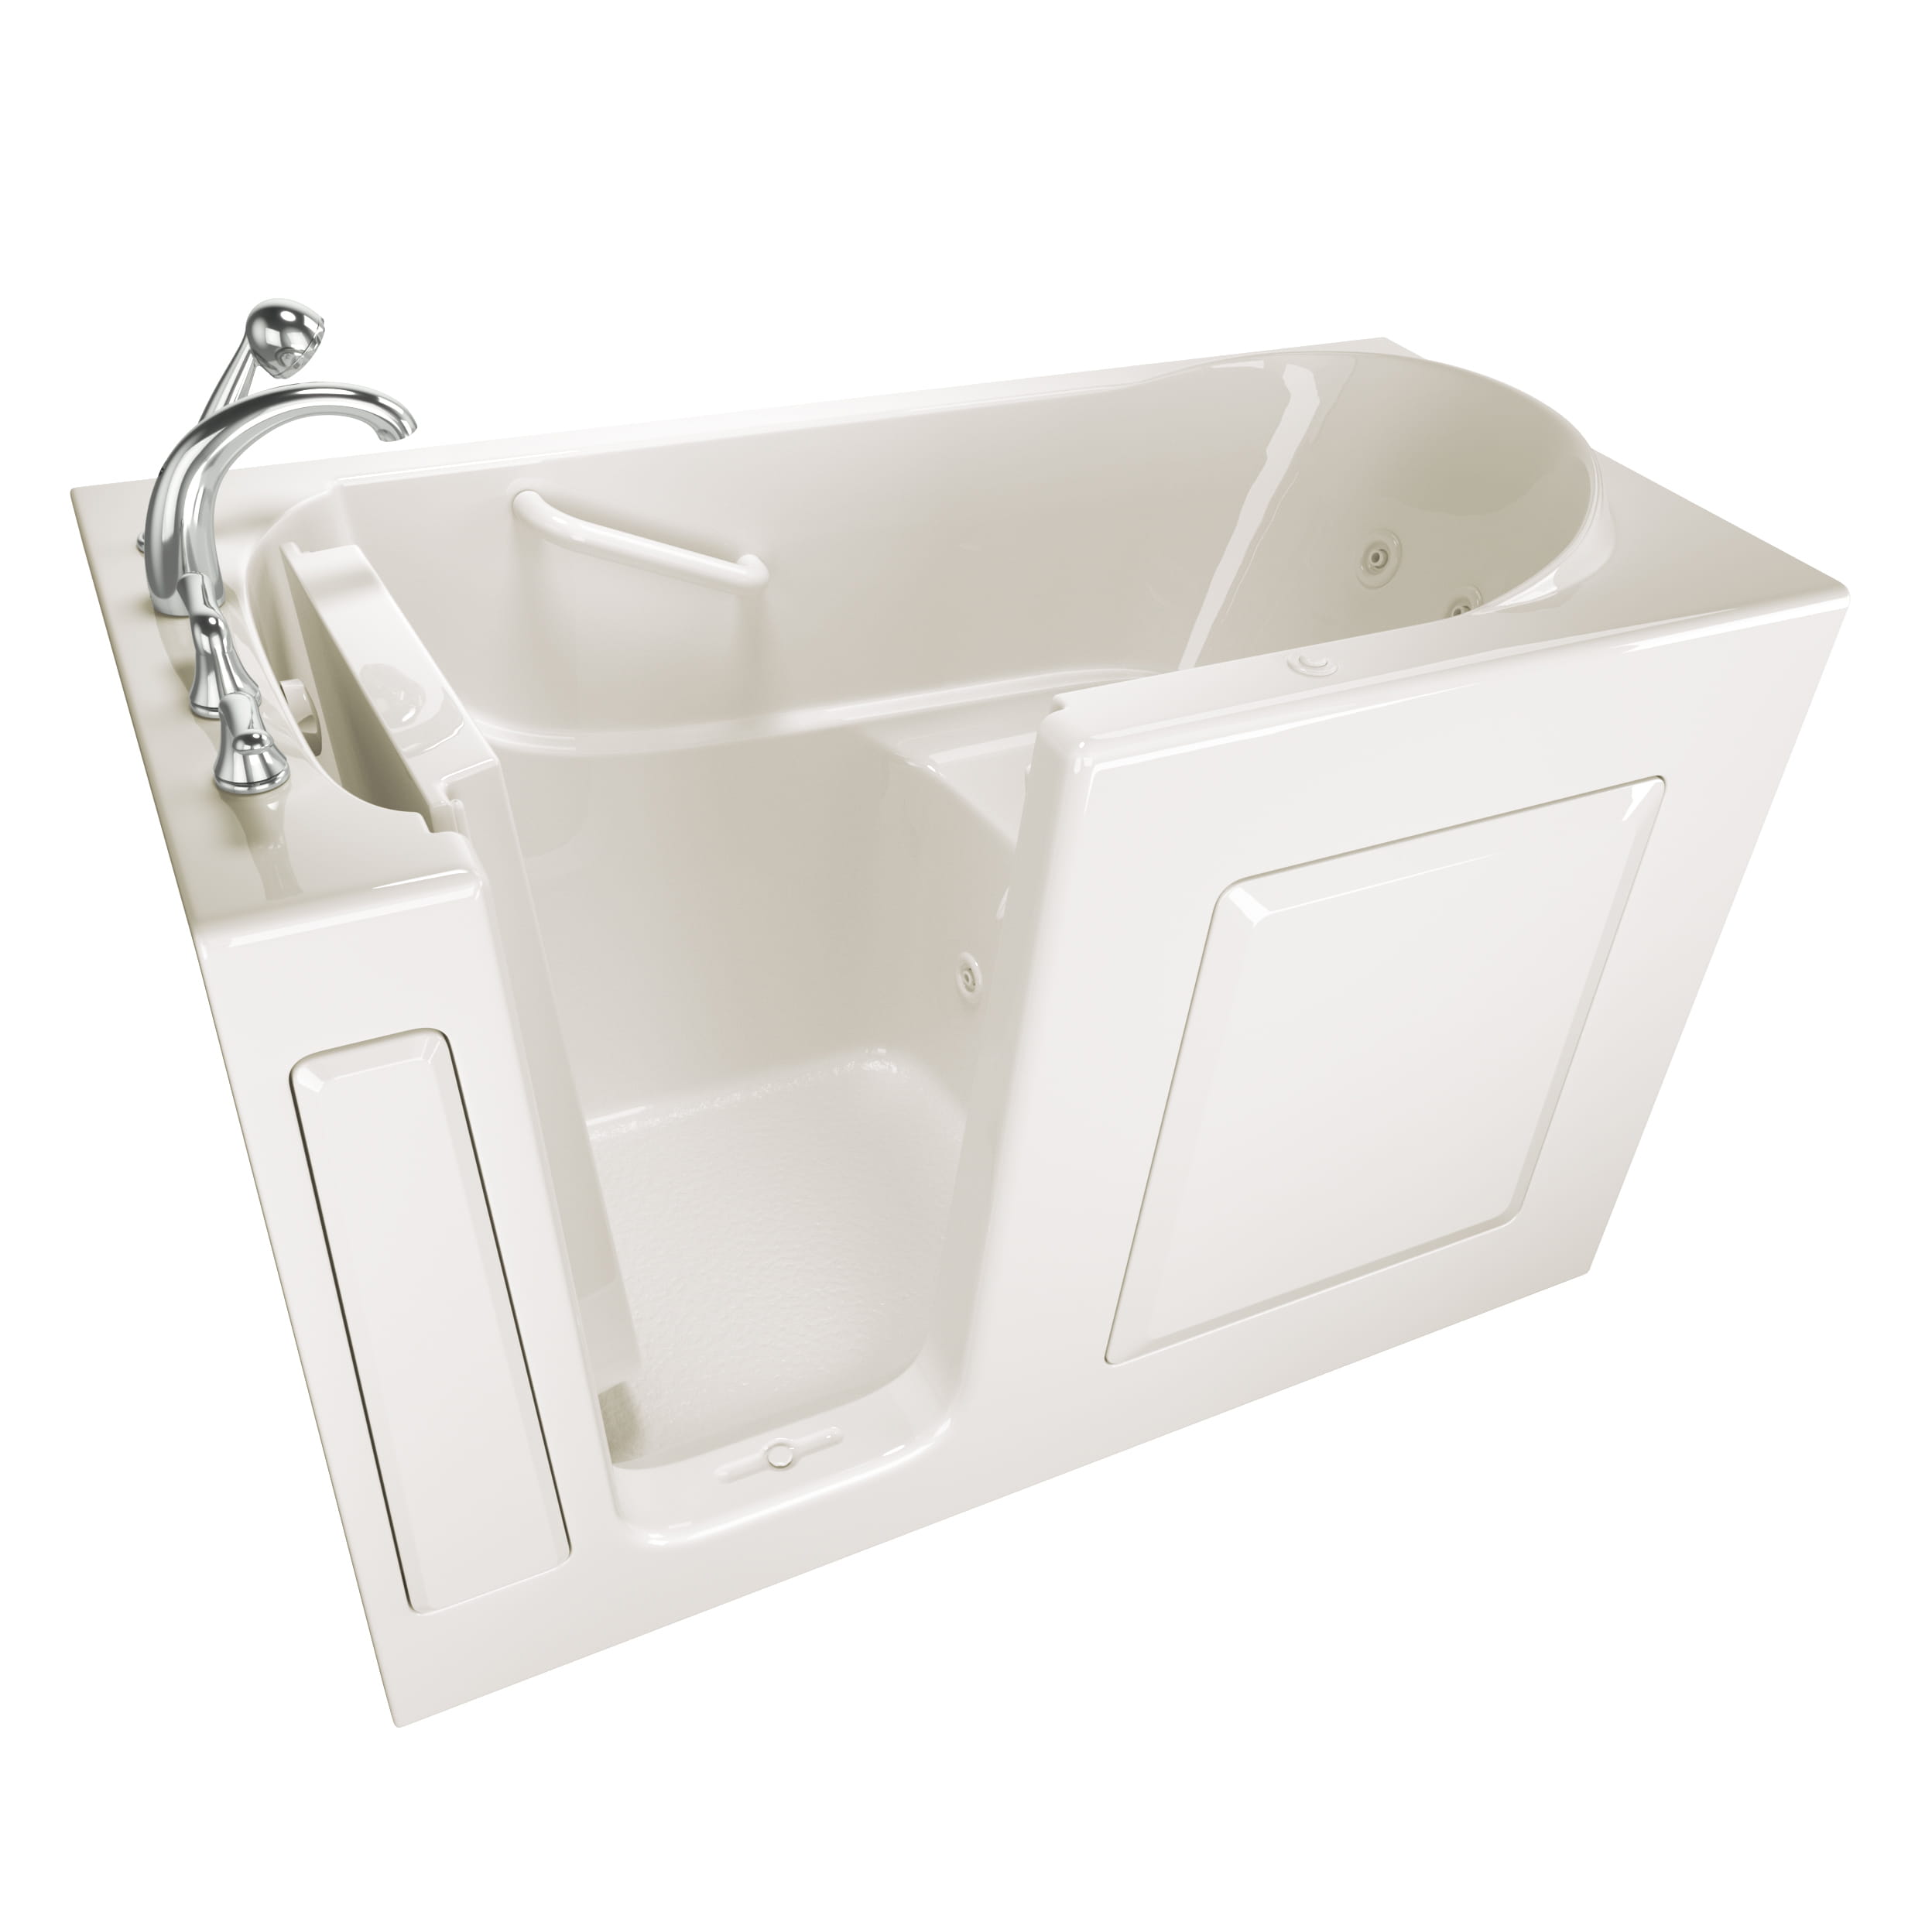 Gelcoat Entry Series 60 x 30-Inch Walk-In Tub With Whirlpool System – Left-Hand Drain With Faucet